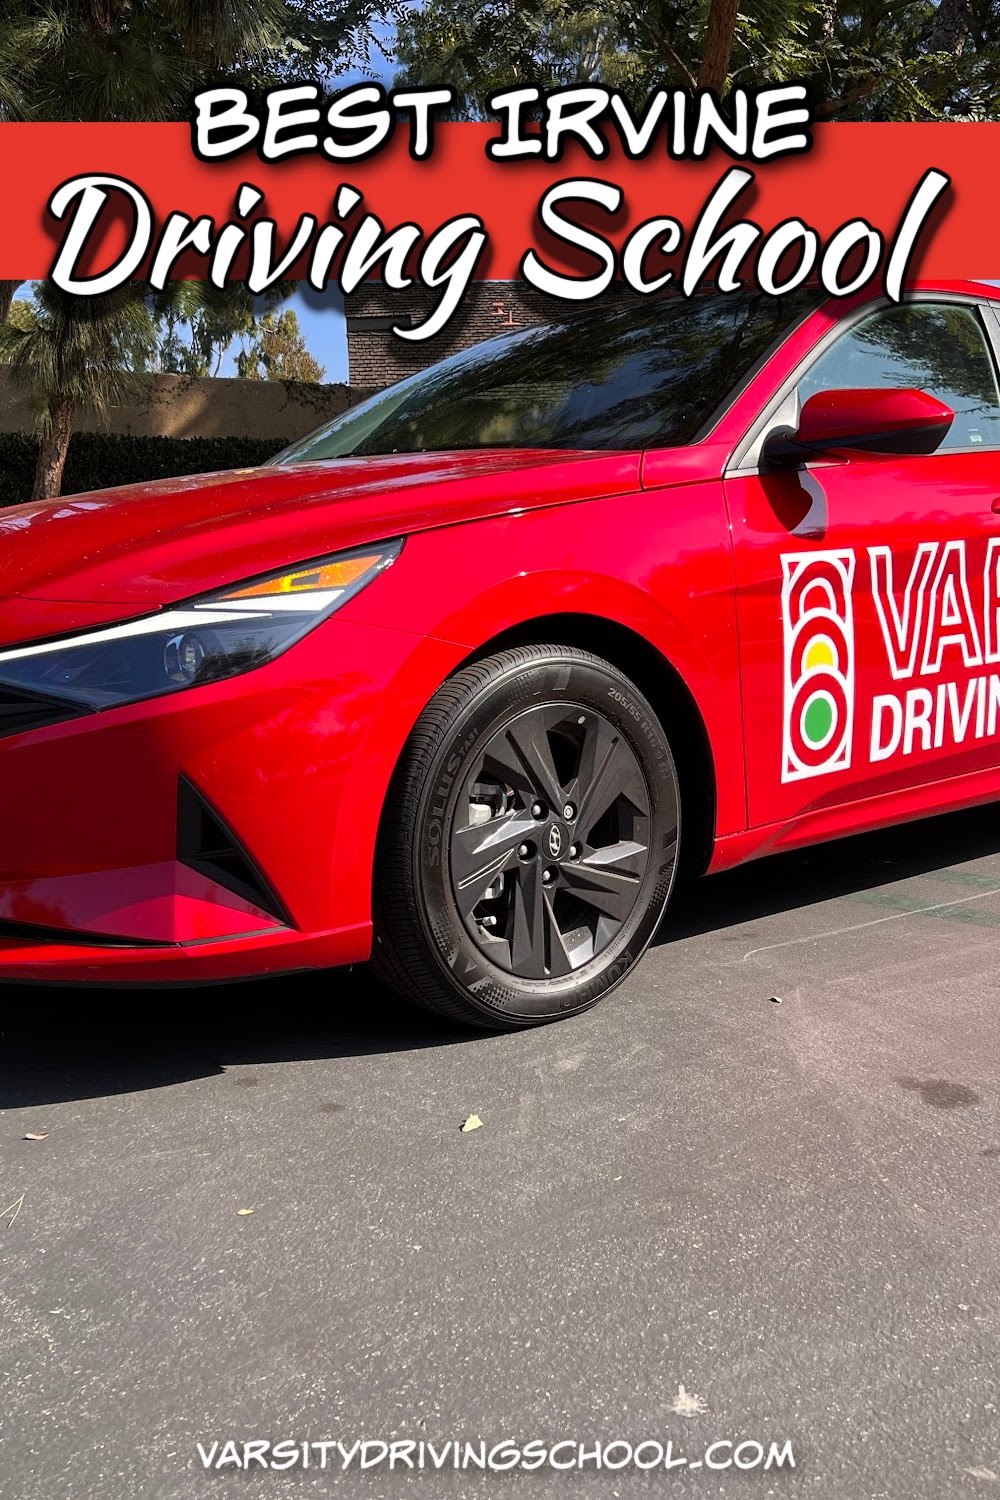 Varsity Driving School is the best Irvine driving school where students learn how to drive defensively and safely with the best behind the wheel training.